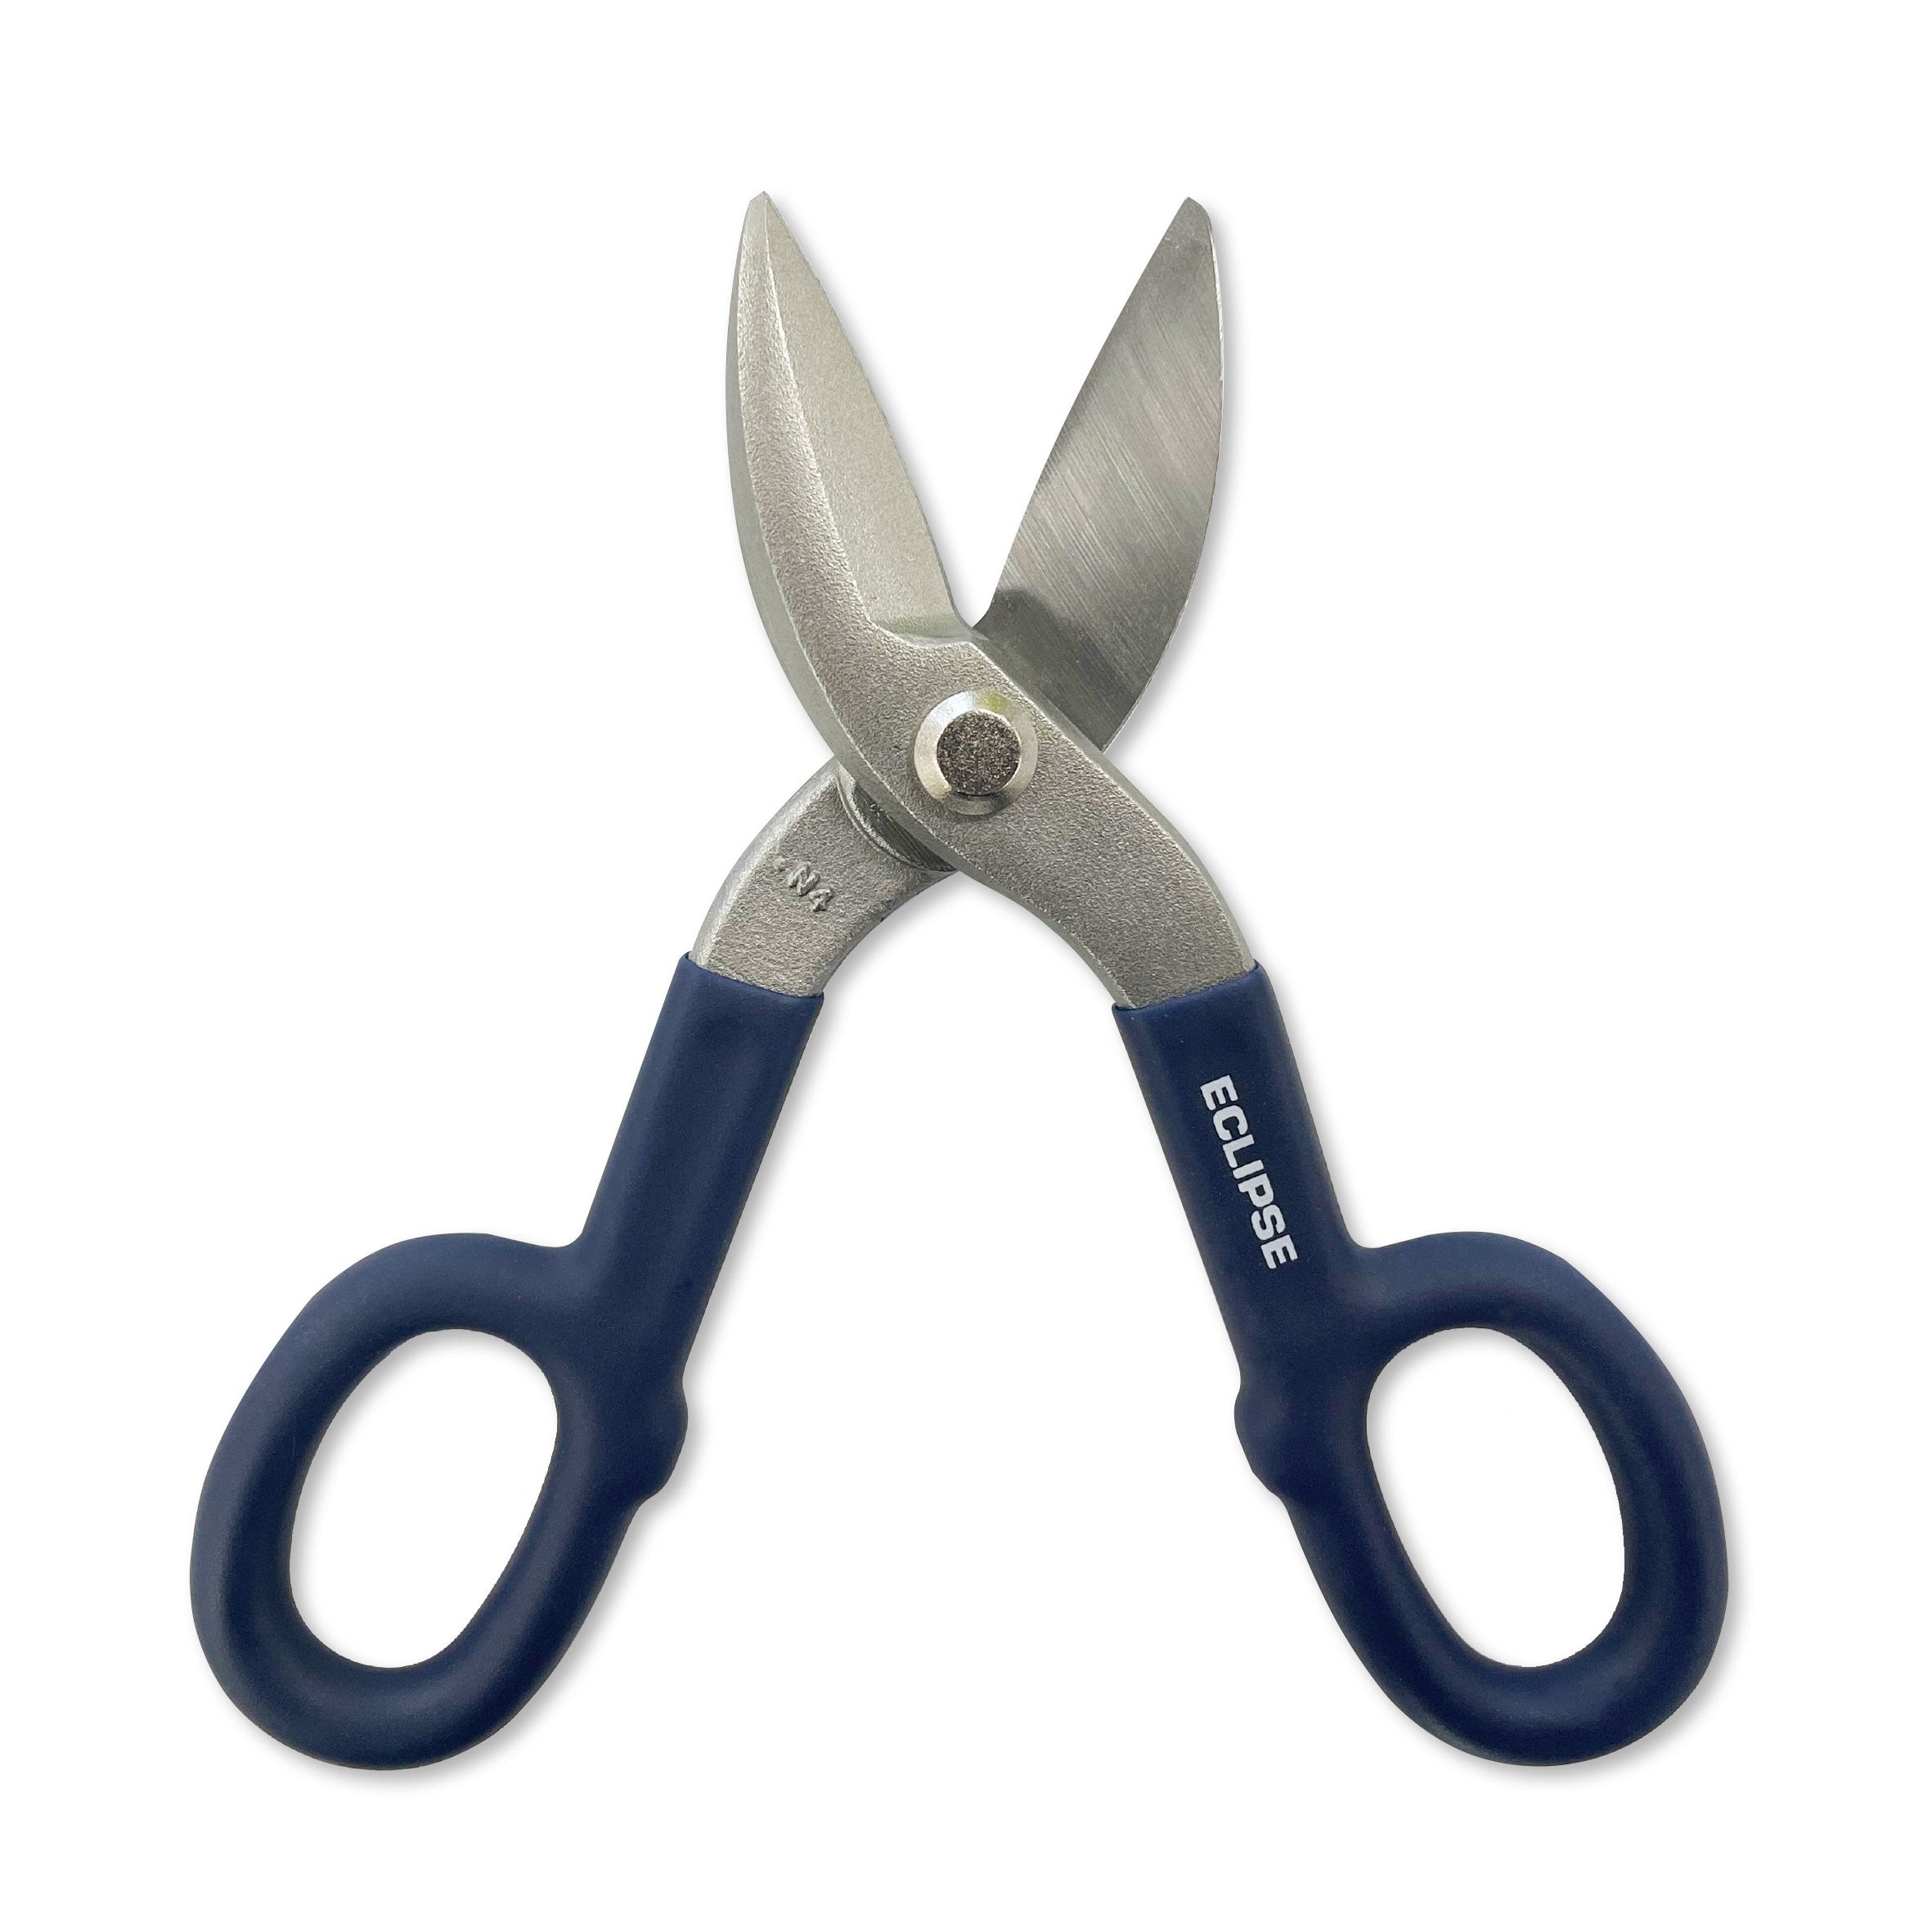 Eclipse Tin Snips ECTS7 180MM/7" - Premium Snips from Eclipse - Just $12.95! Shop now at W Hurst & Son (IW) Ltd